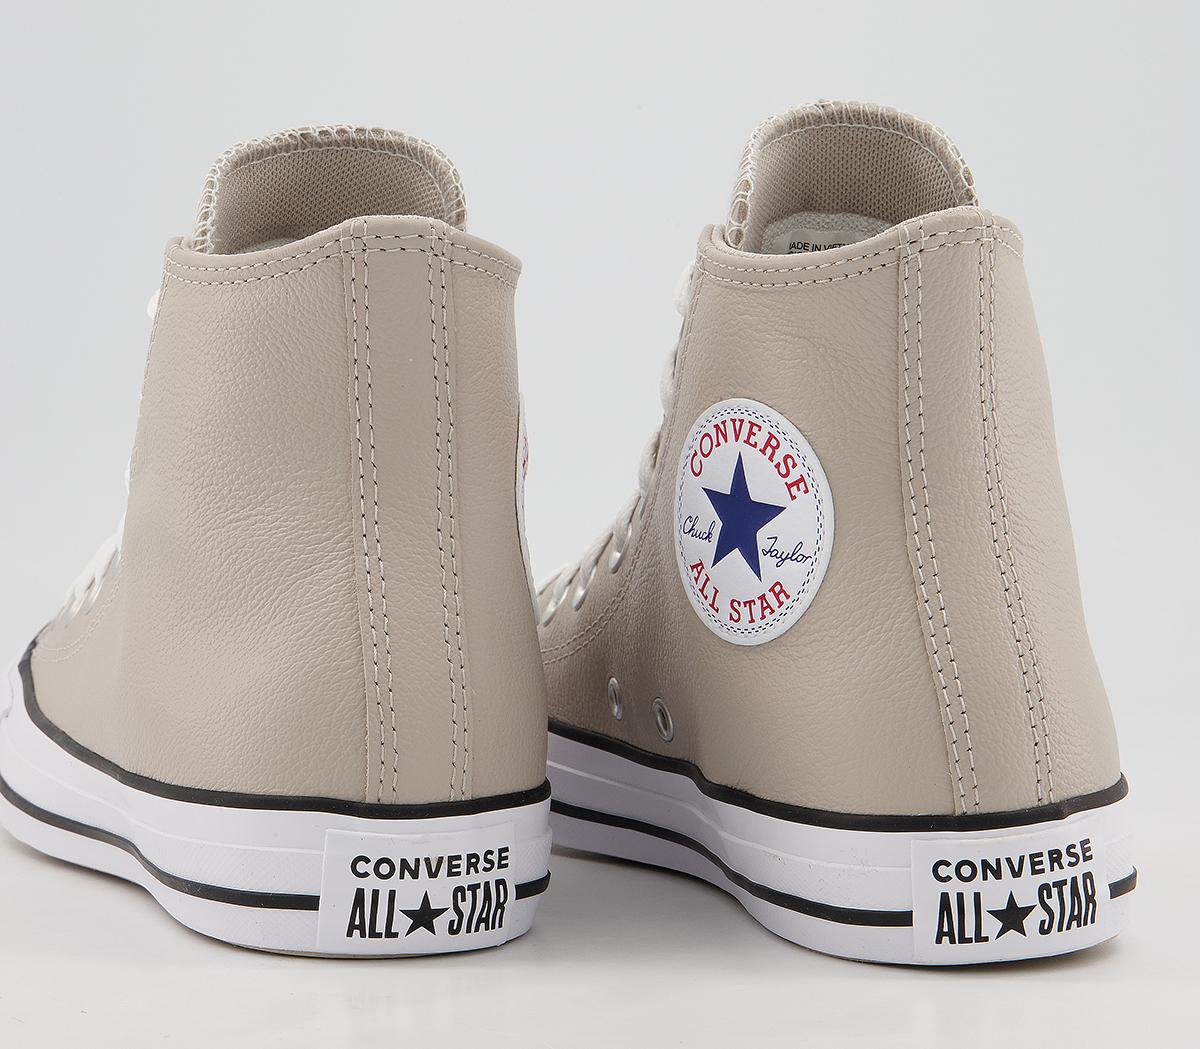 Converse All Star Hi Leather Trainers String - Women's Trainers